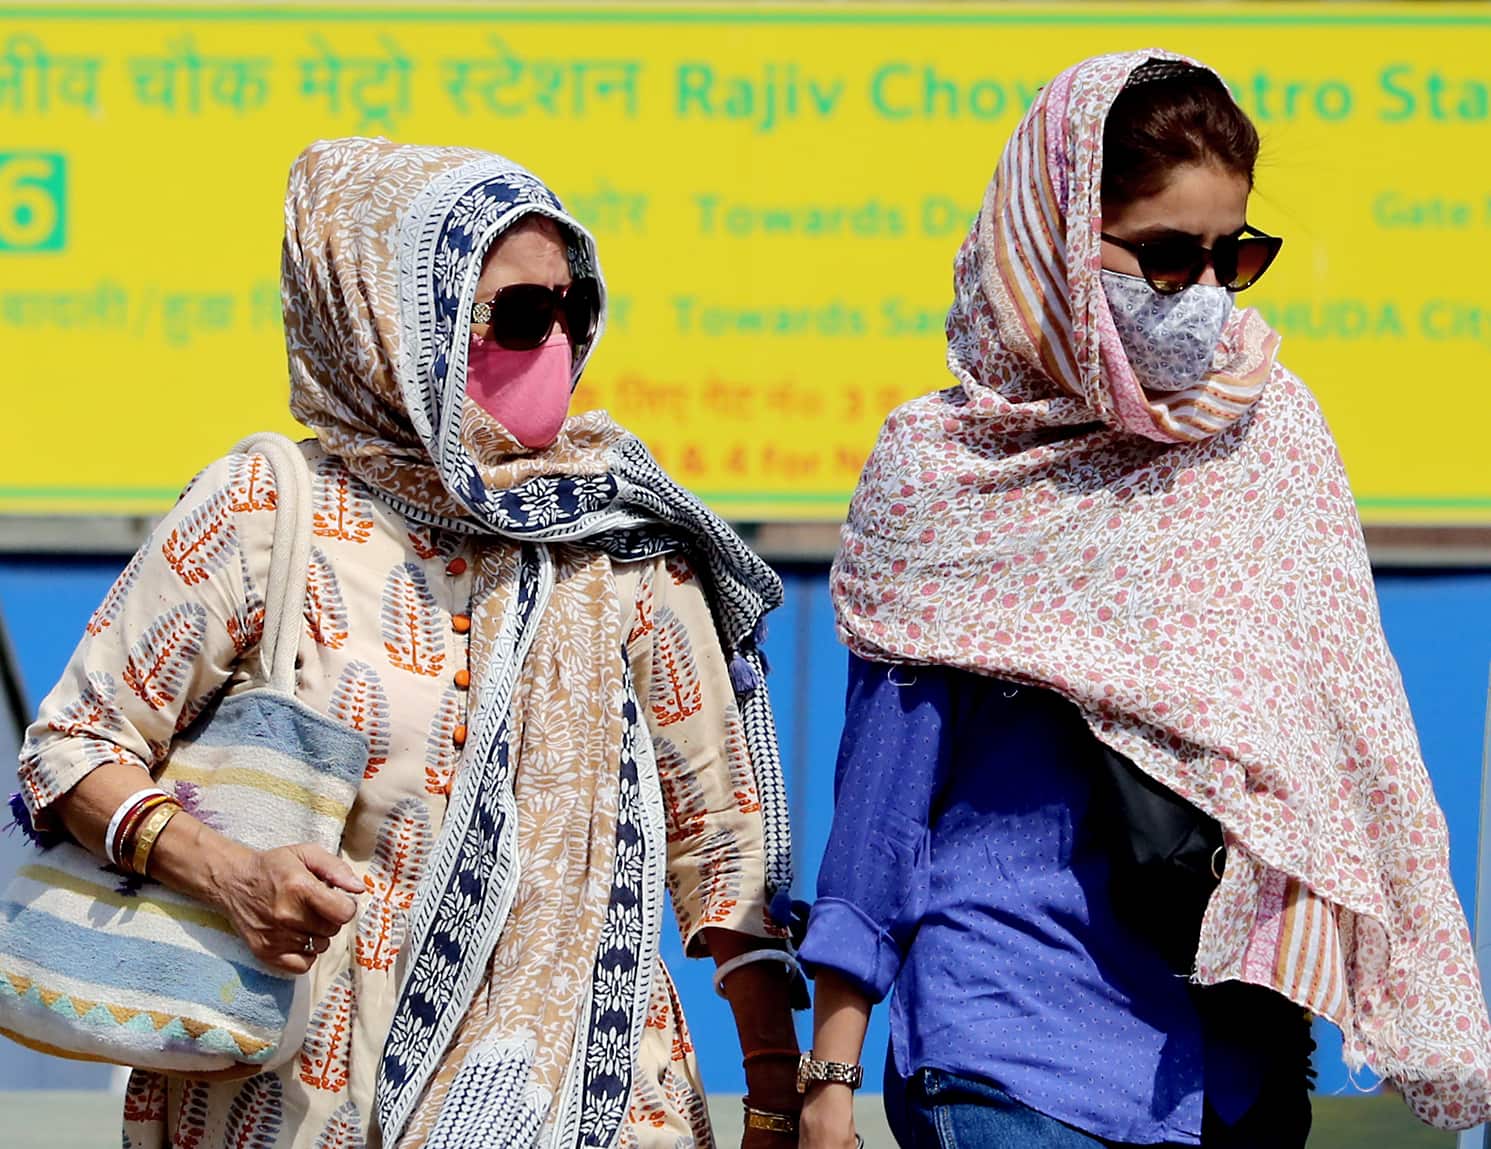 India records 49 degree Celsius, what would happen if temperature soars to 50 degree Celsius?